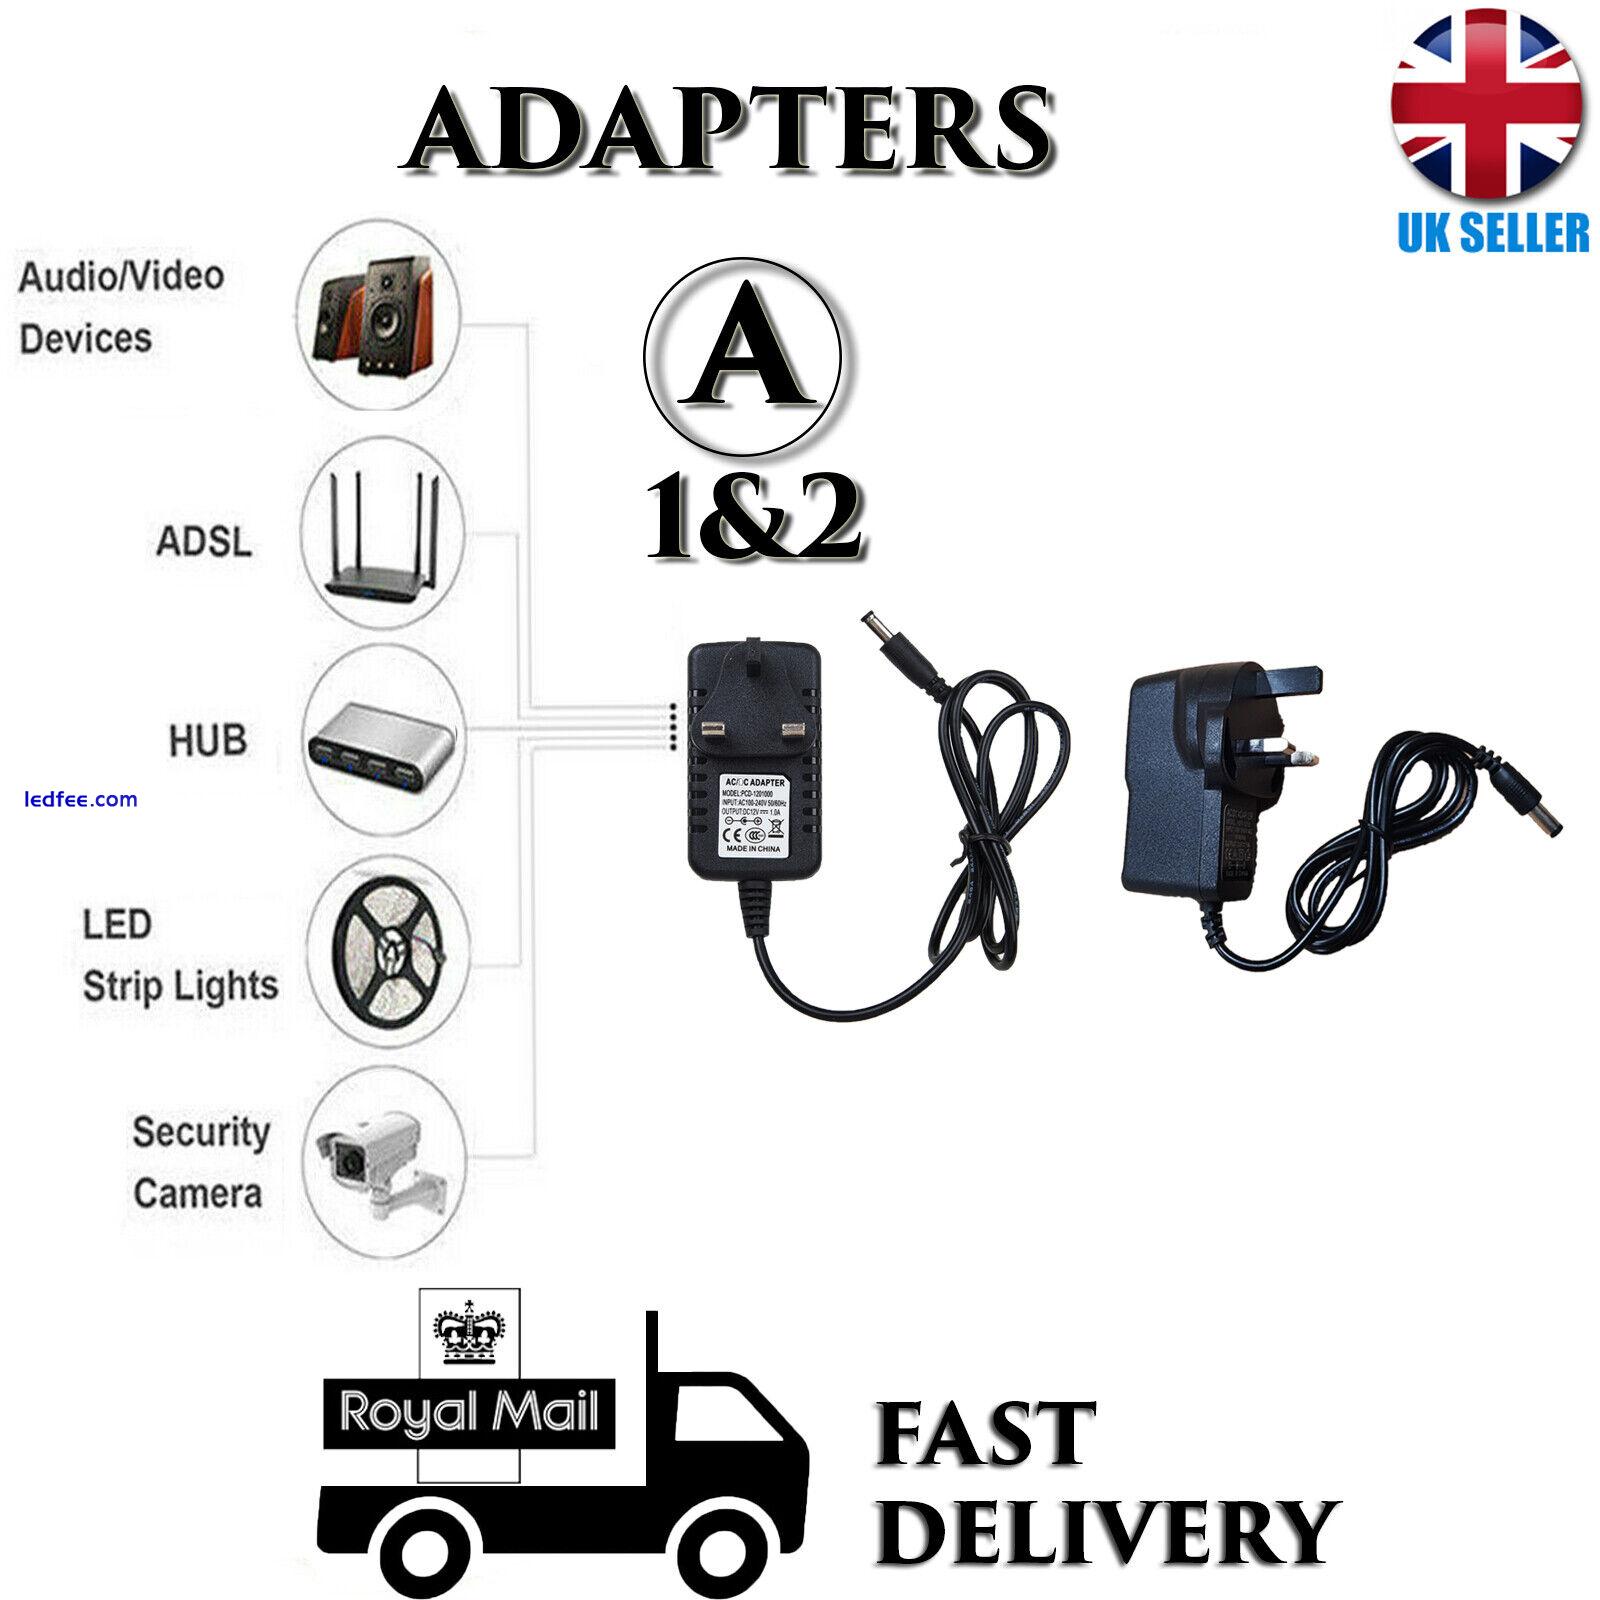 10 x 2A AC/DC UK Power Supply Adapter Safety Charger For LED Strip CCTV Camera 1 